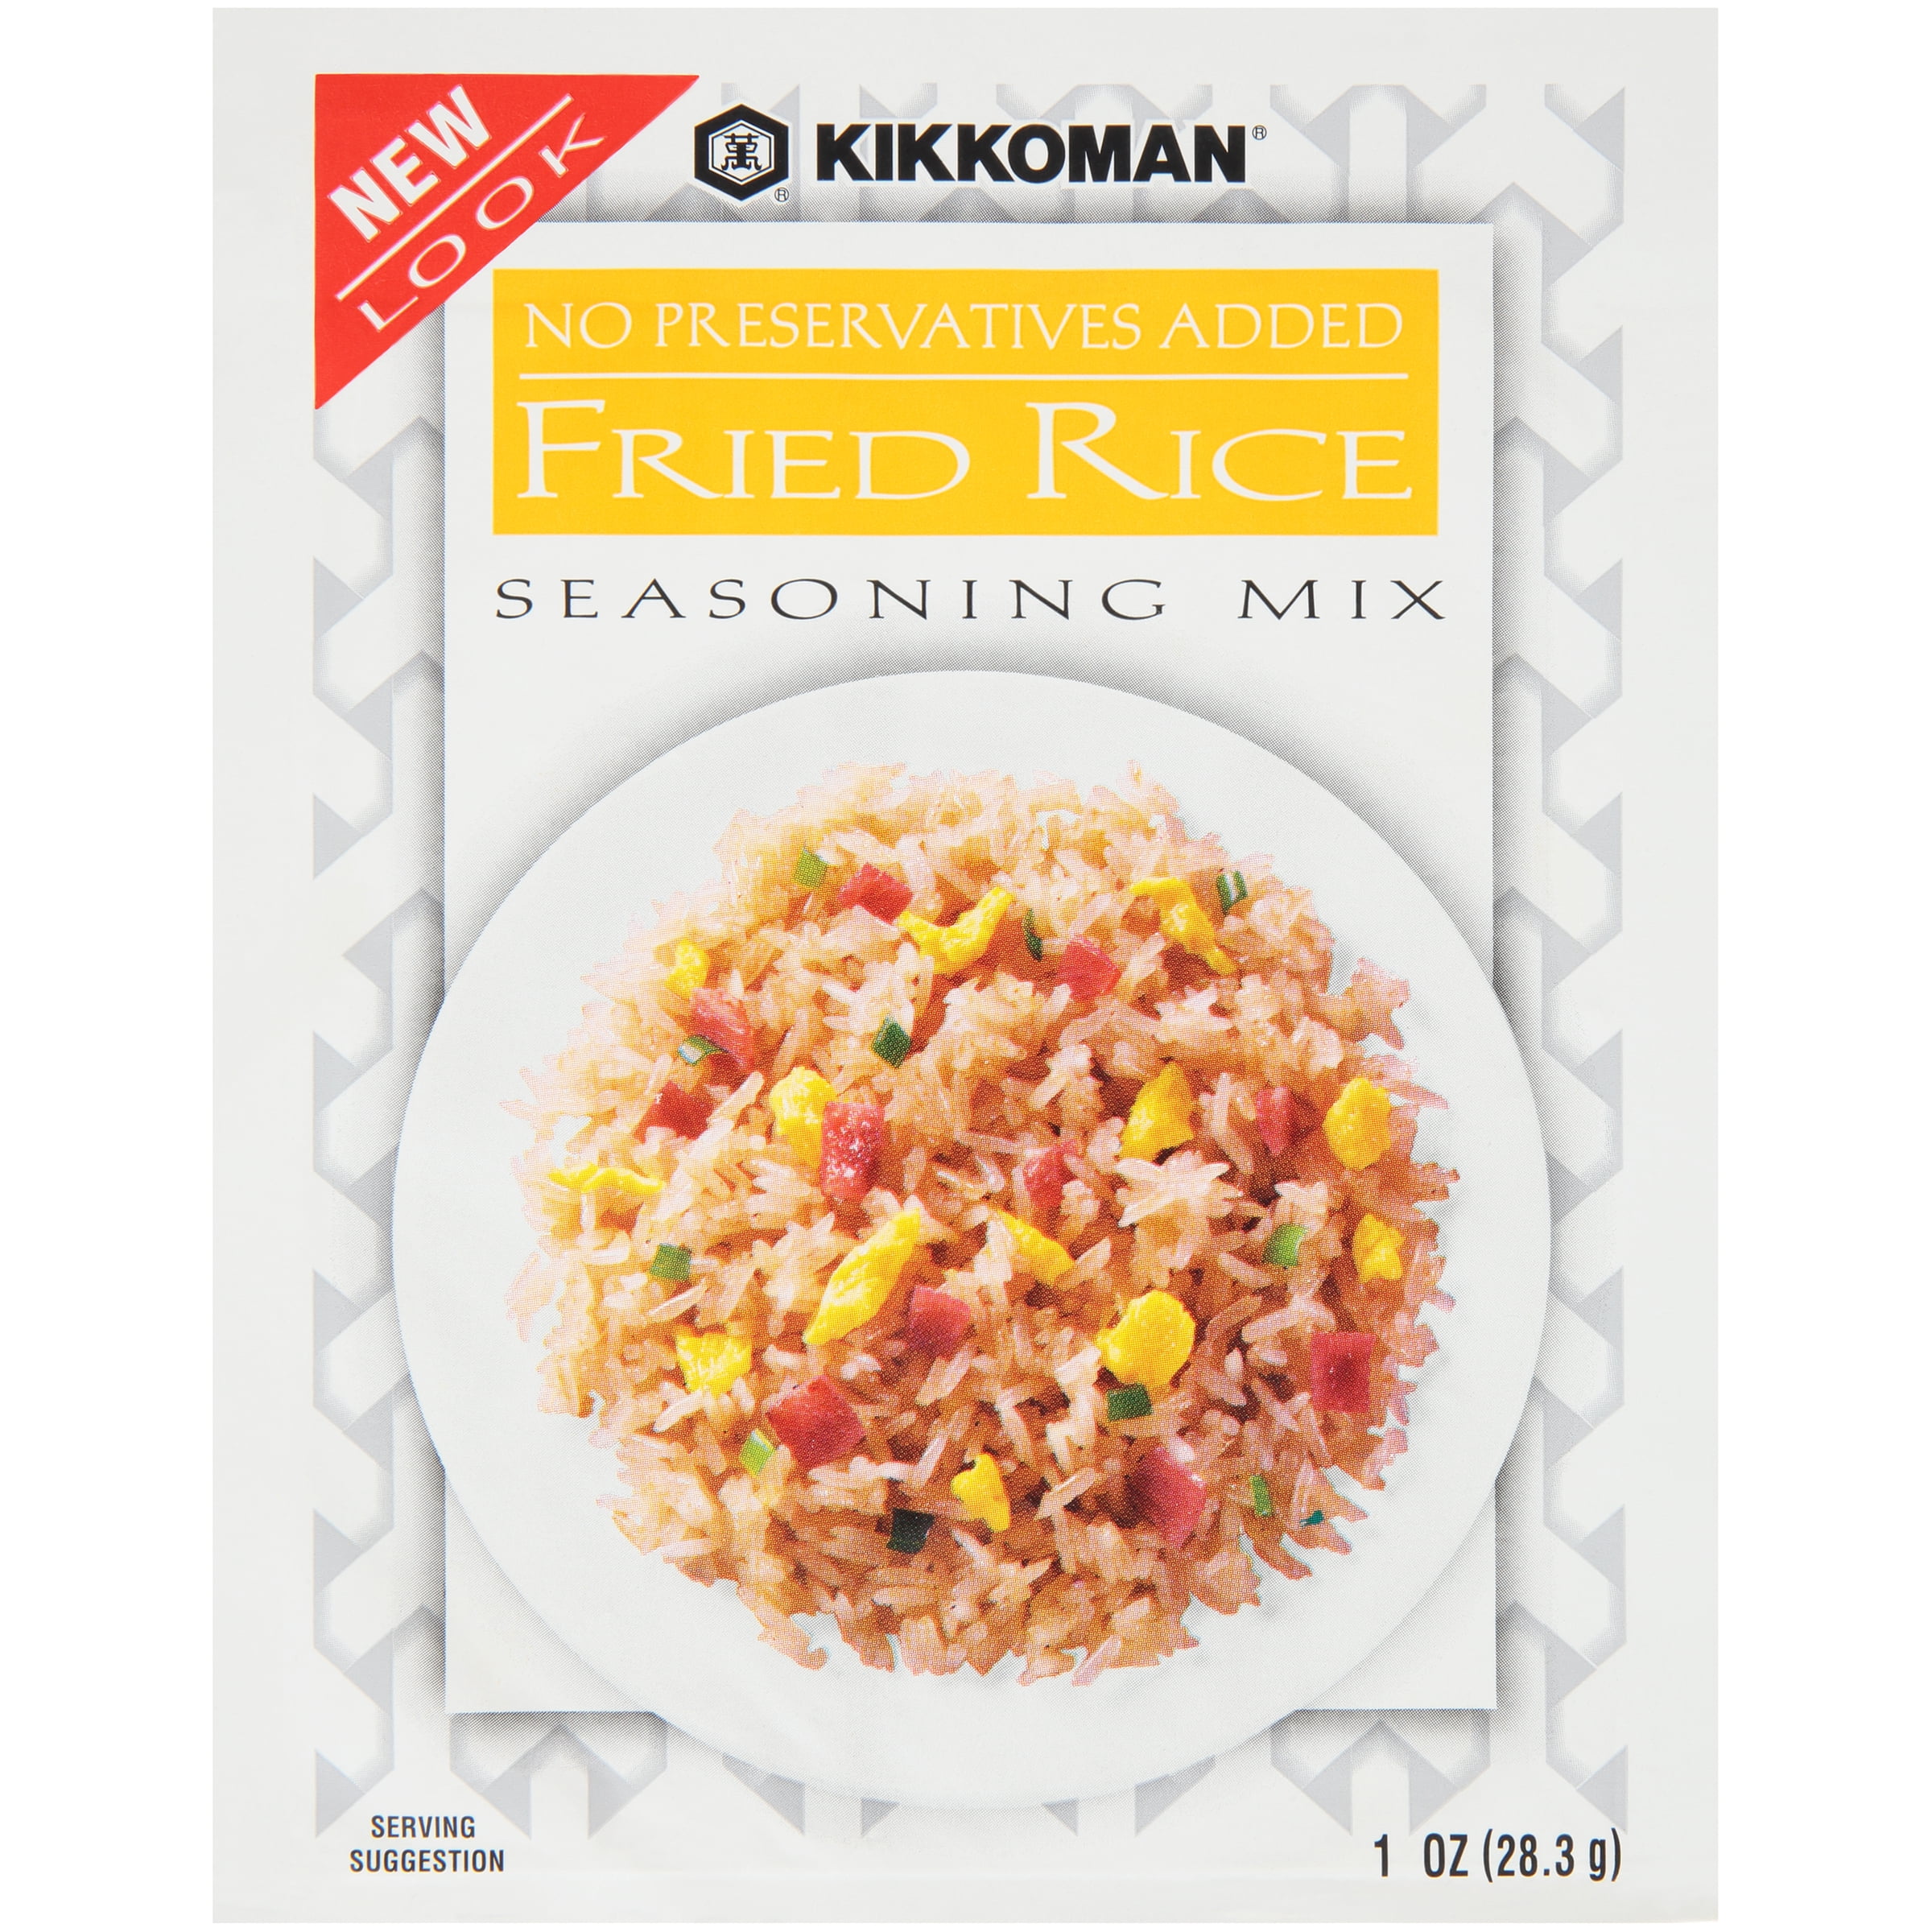 Chief Fried Rice Seasoning - 2 Count – D'Tuck Shoppe